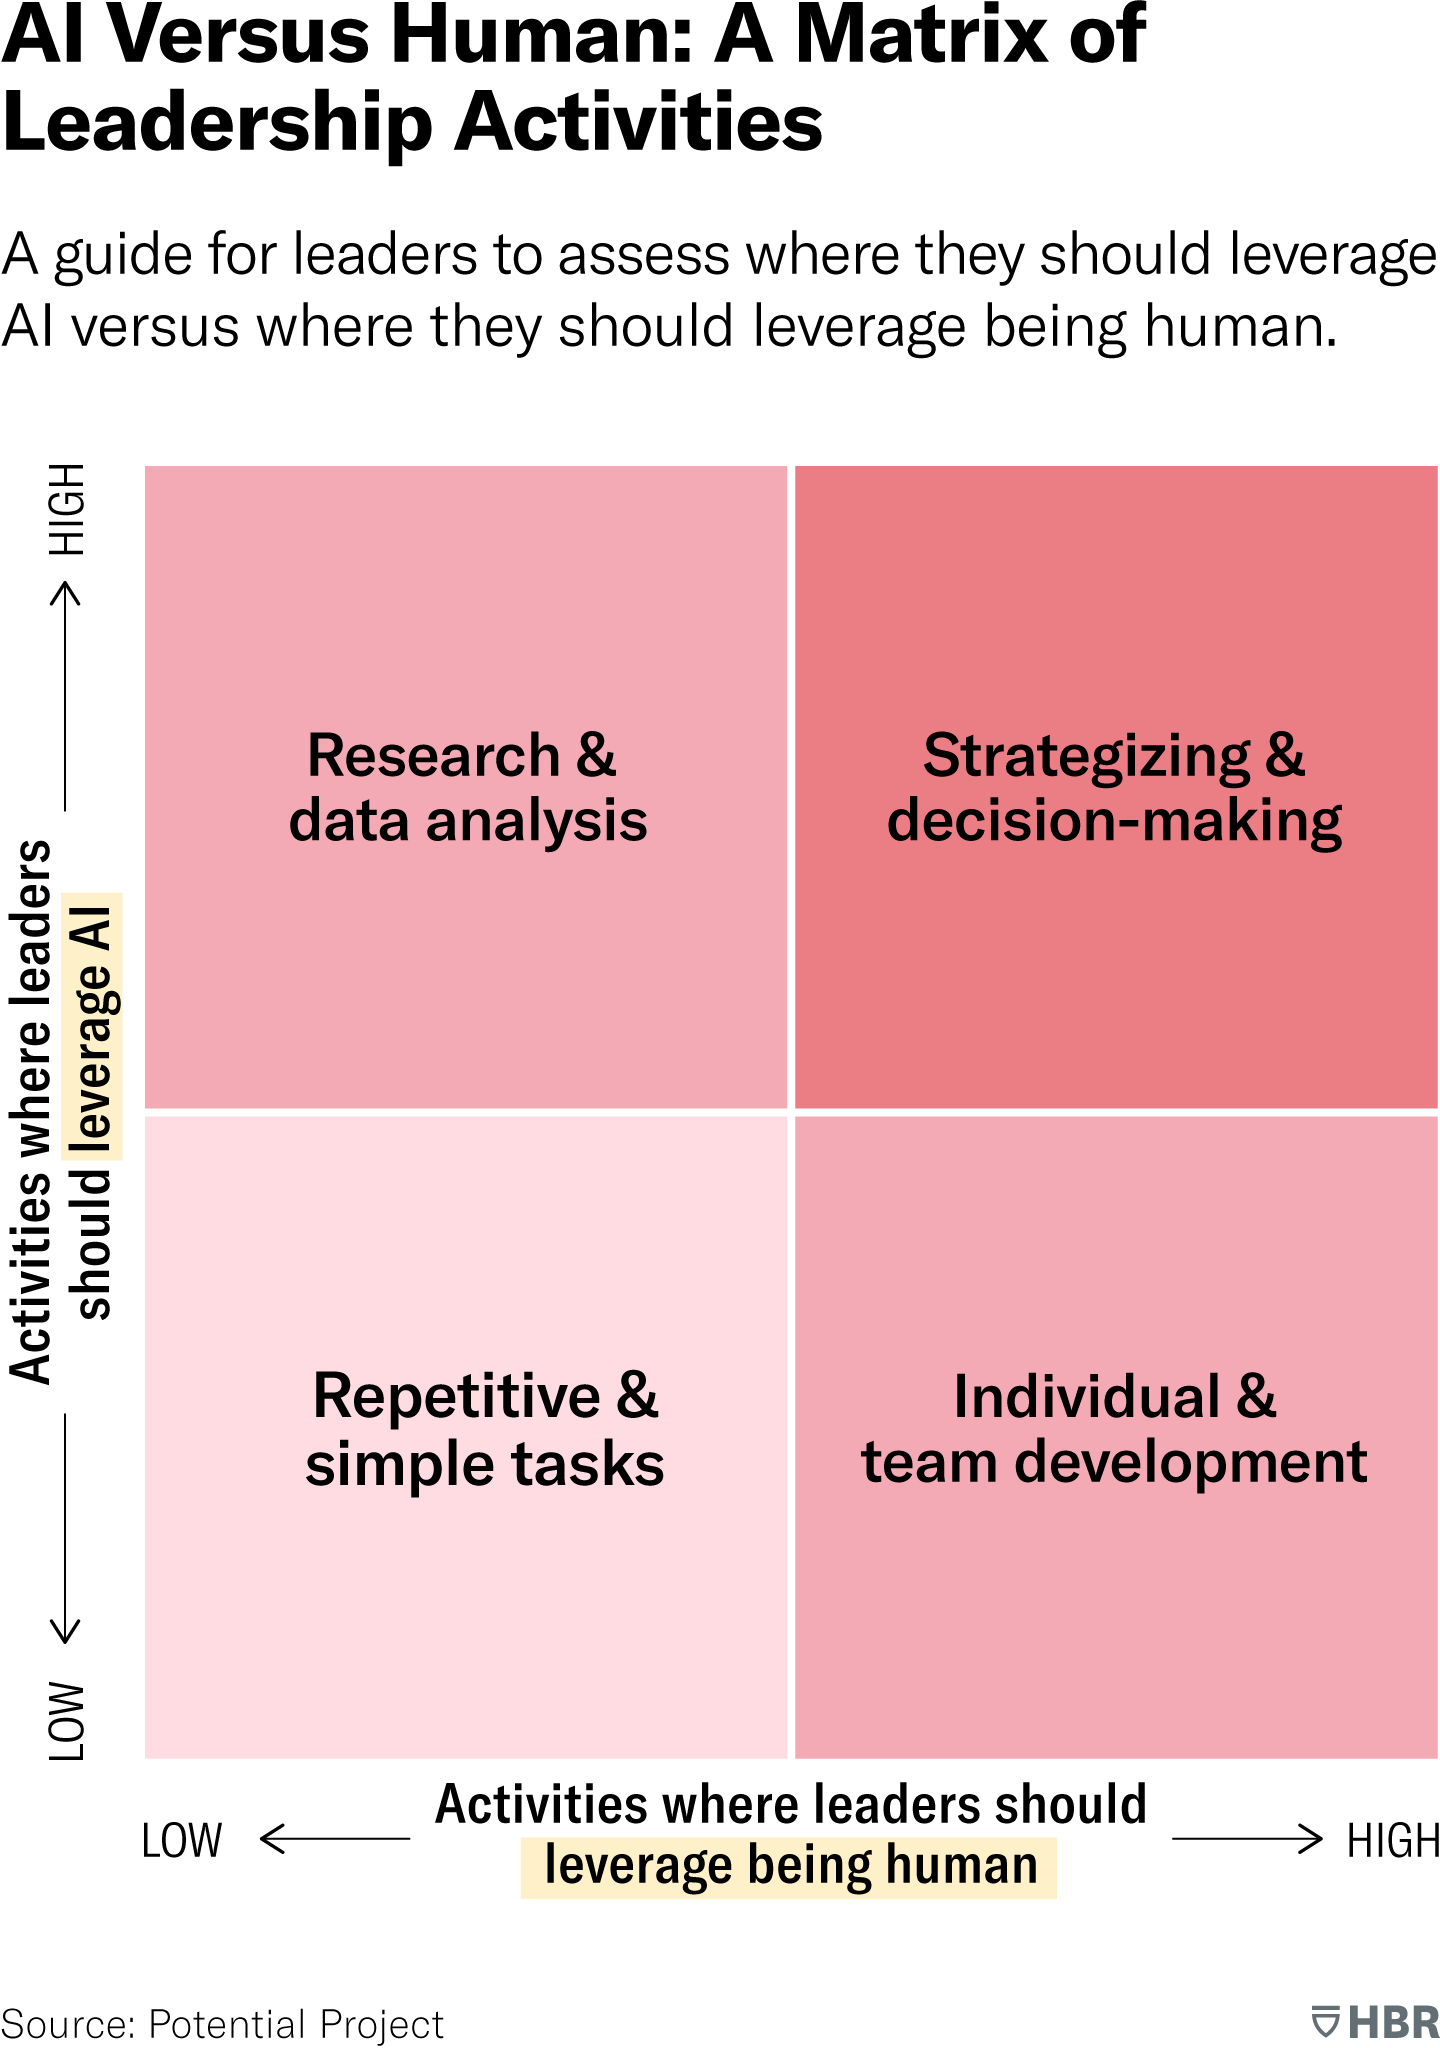 A 2 by 2 chart provides a guide for leaders to assess where they should leverage A I versus where they should leverage being human. Activities that are “High” in analyzing large volumes of research and data should be done by A I, while activities that are “High” in individual and team development should be done with the best qualities of our humanity. For activities that are both complex and will greatly impact people, like strategizing and decision-making, leaders should leverage both A I and their own humanity. Activities that are “Low” in complexity and “Low” in terms of human impact, like repetitive and simple tasks, can be completed with simple A I technologies that enable efficiency and effectiveness. Source: Potential Project